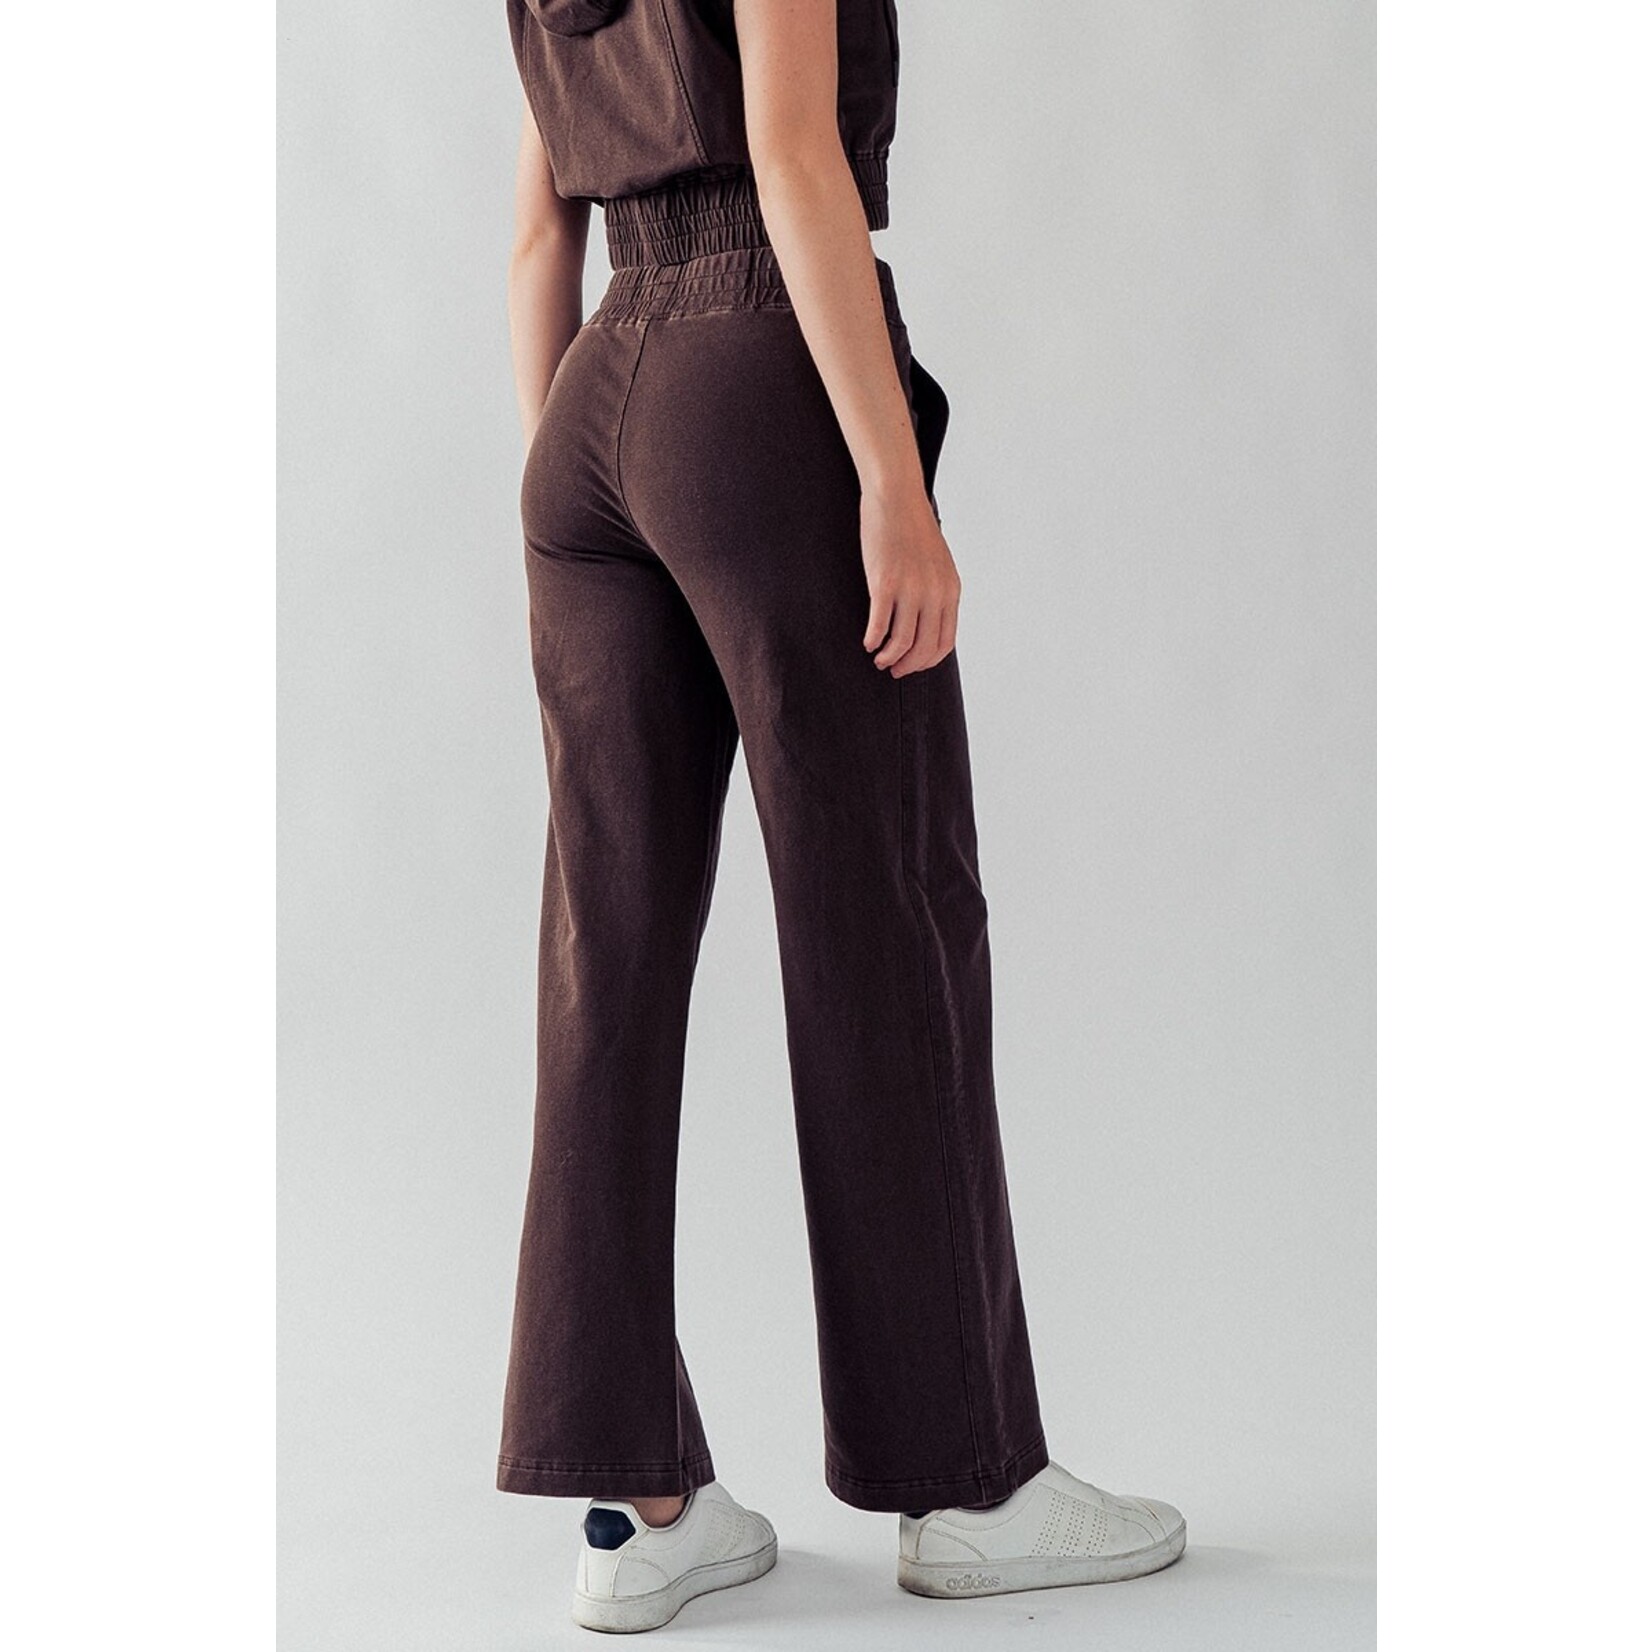 Trend Notes Bray Elastic Waist Mineral Wash Pants